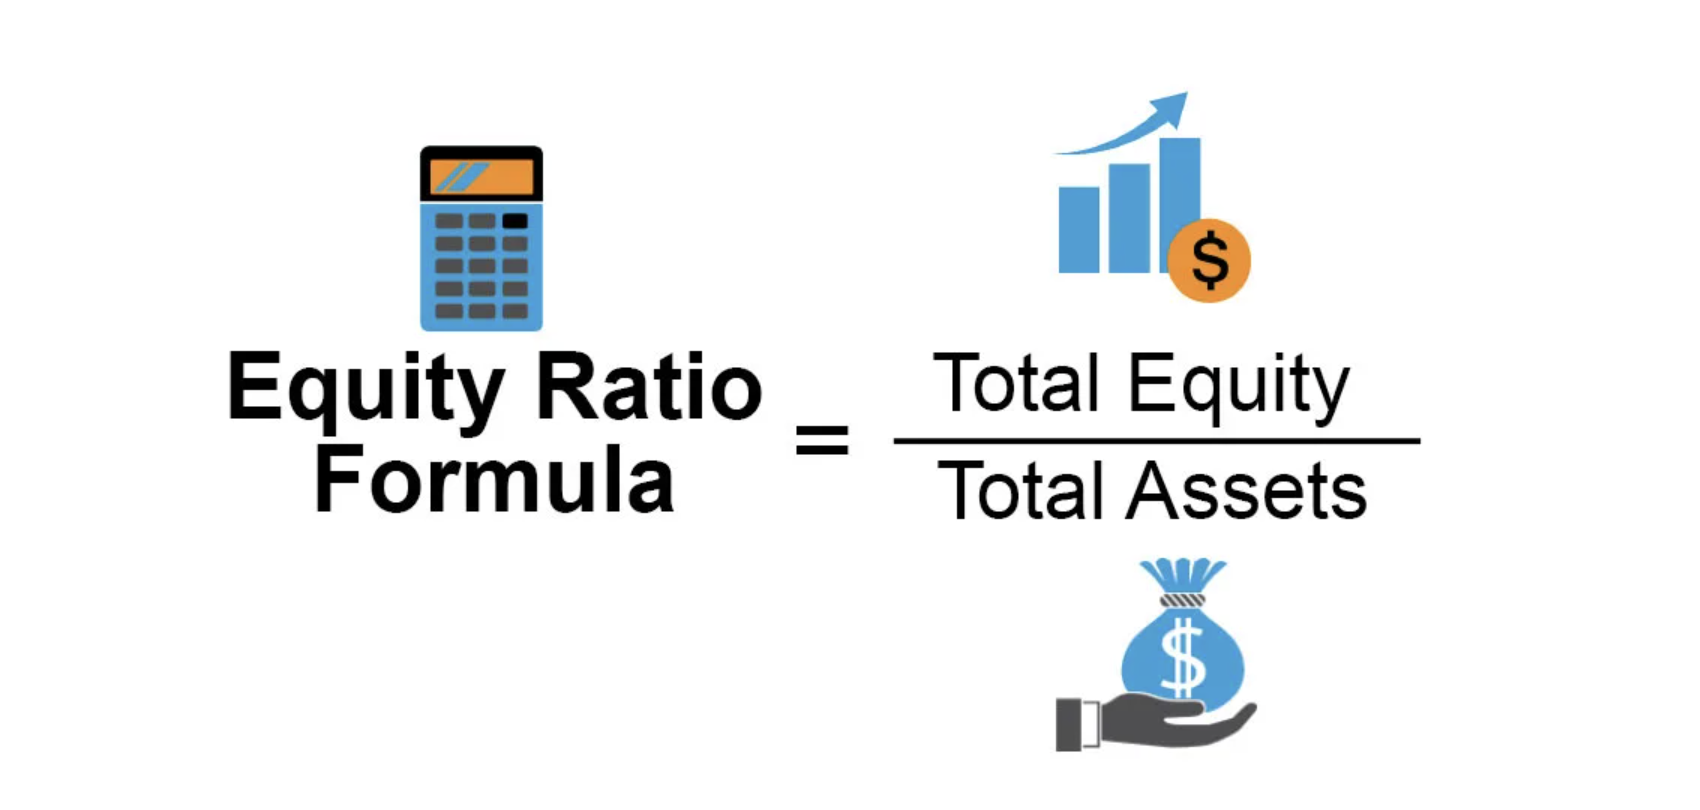 Equity ratio formula = Total Equity / Total Assets.